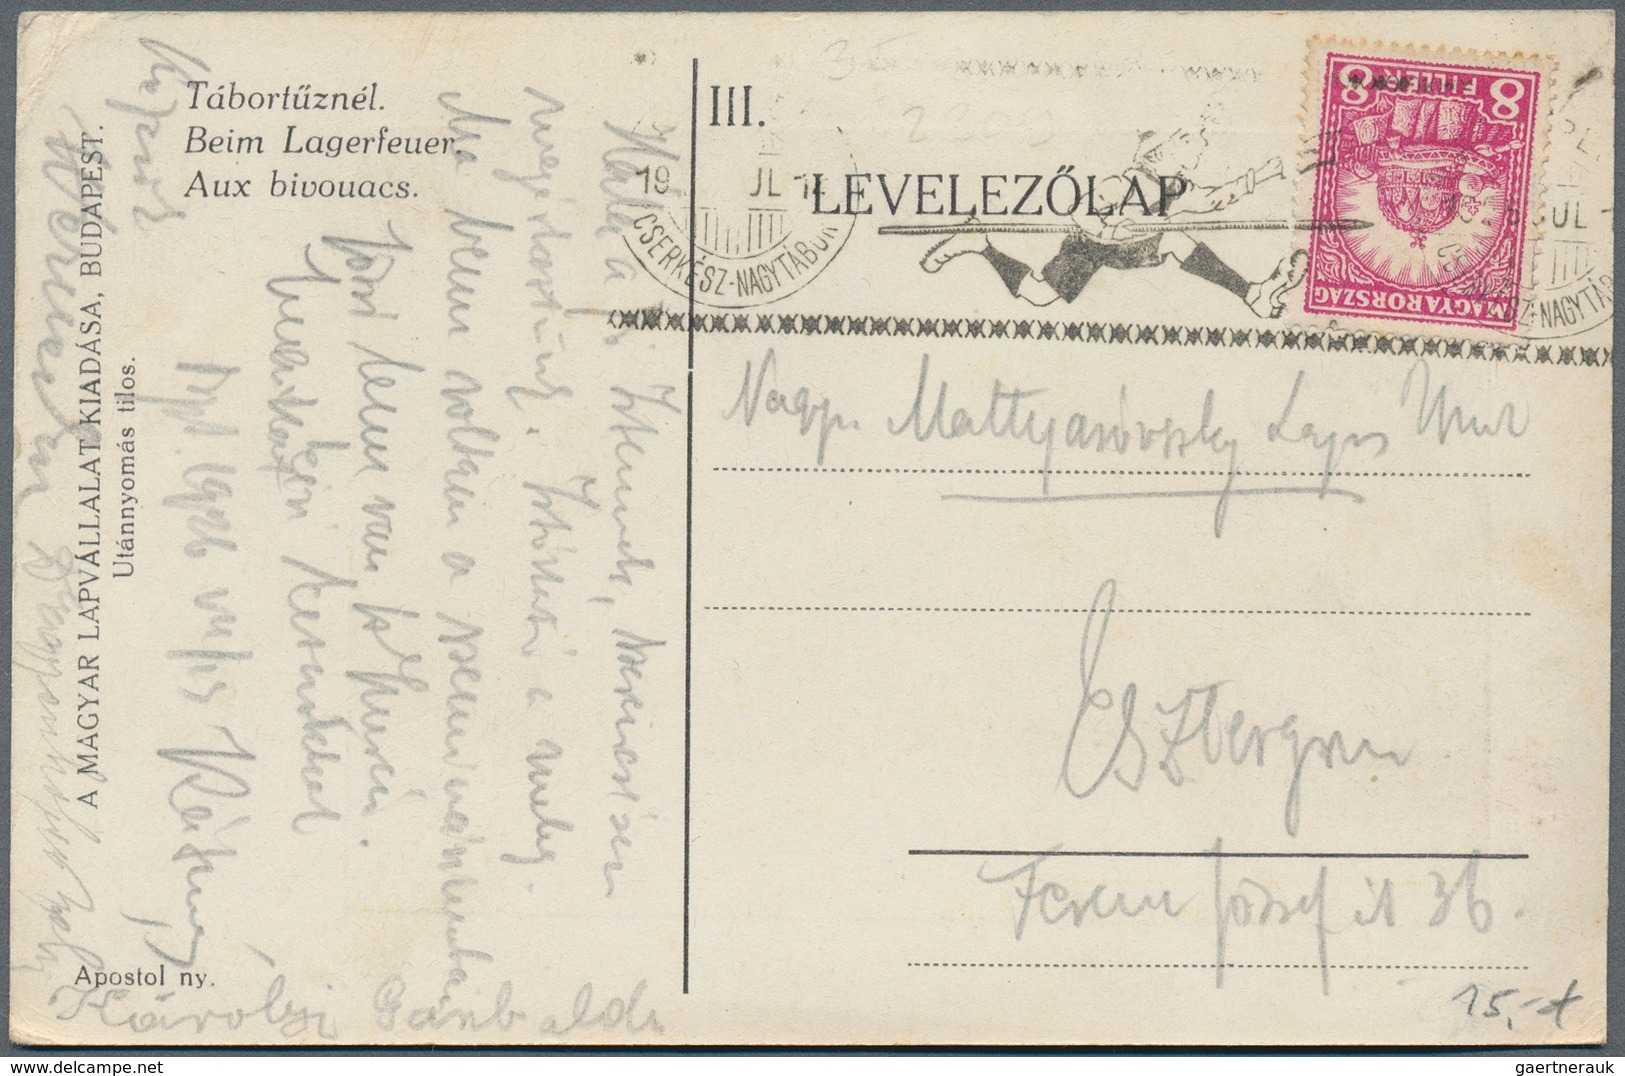 Thematik: Pfadfinder / boy scouts: 1920/2010, Hungary. Collection of about 390 covers, cards and doc